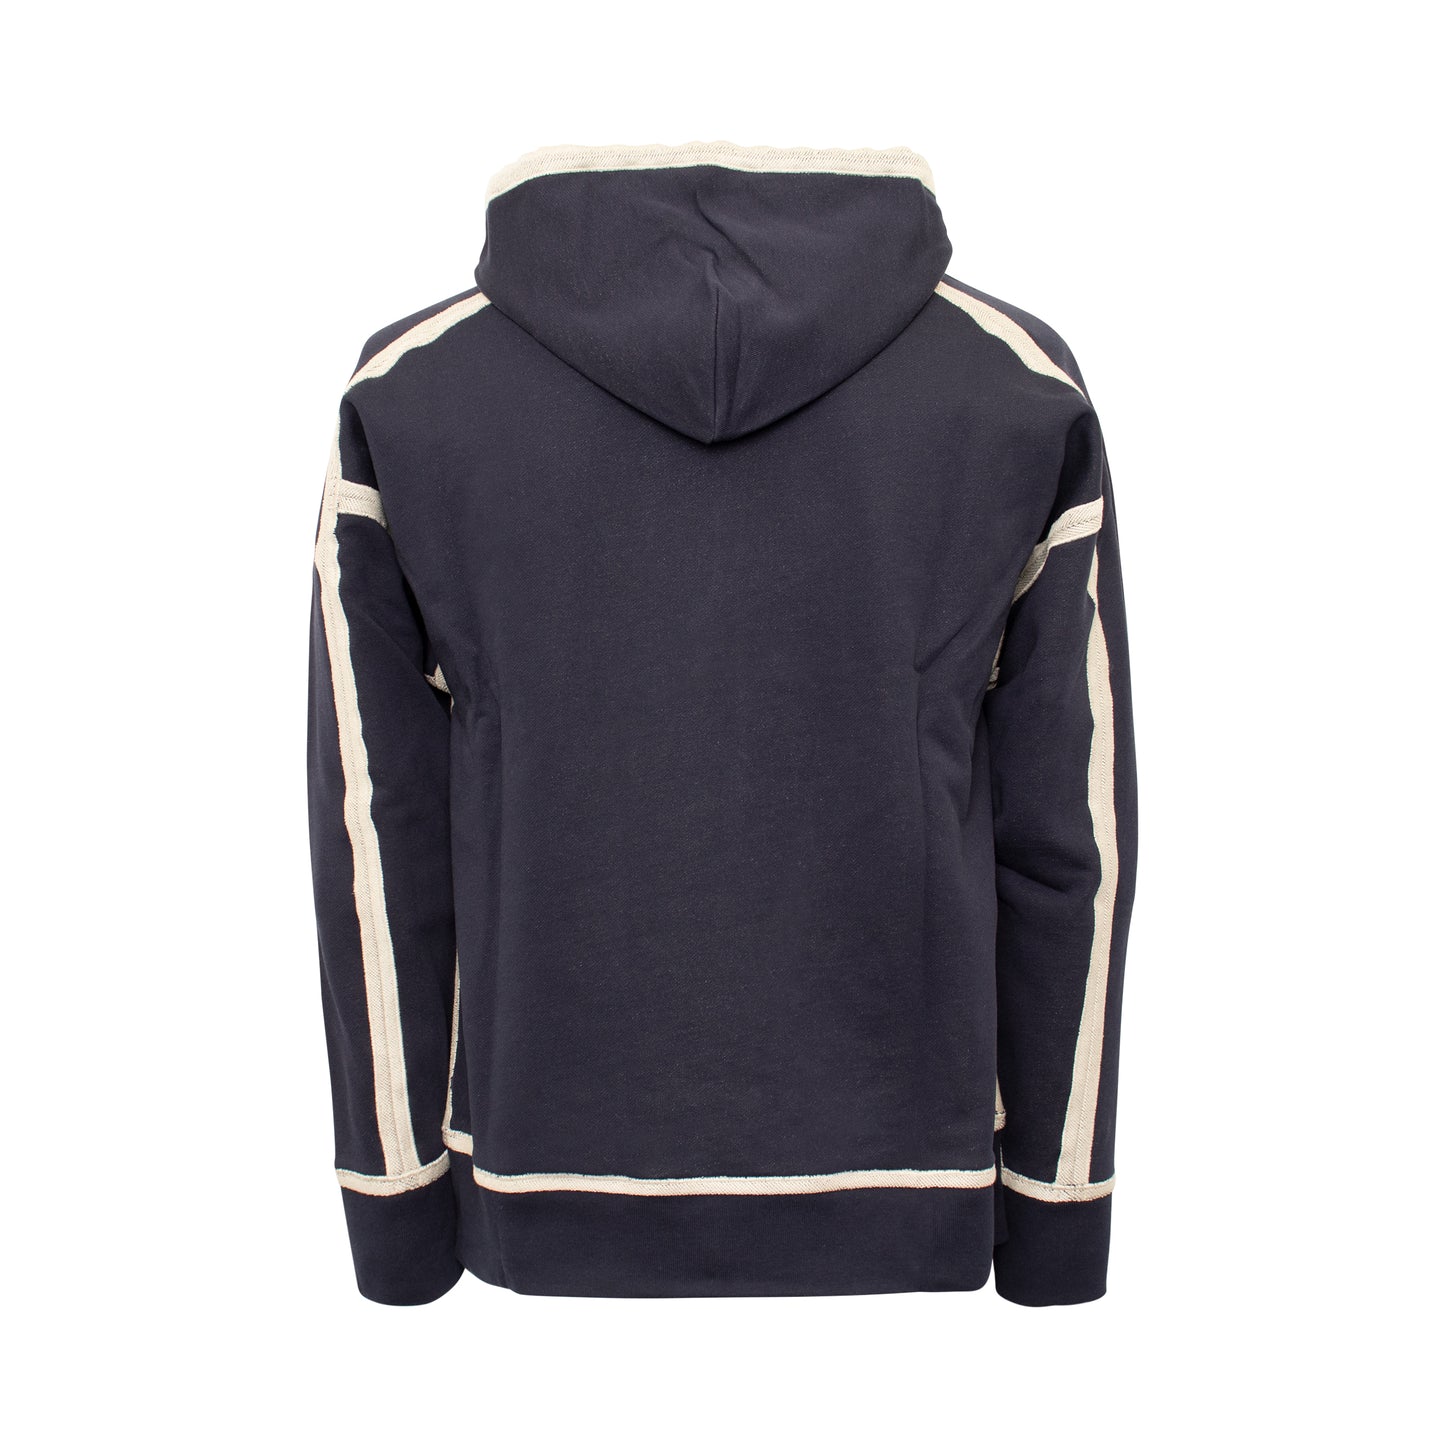 Anagram Embroidered Hoodie in Navy